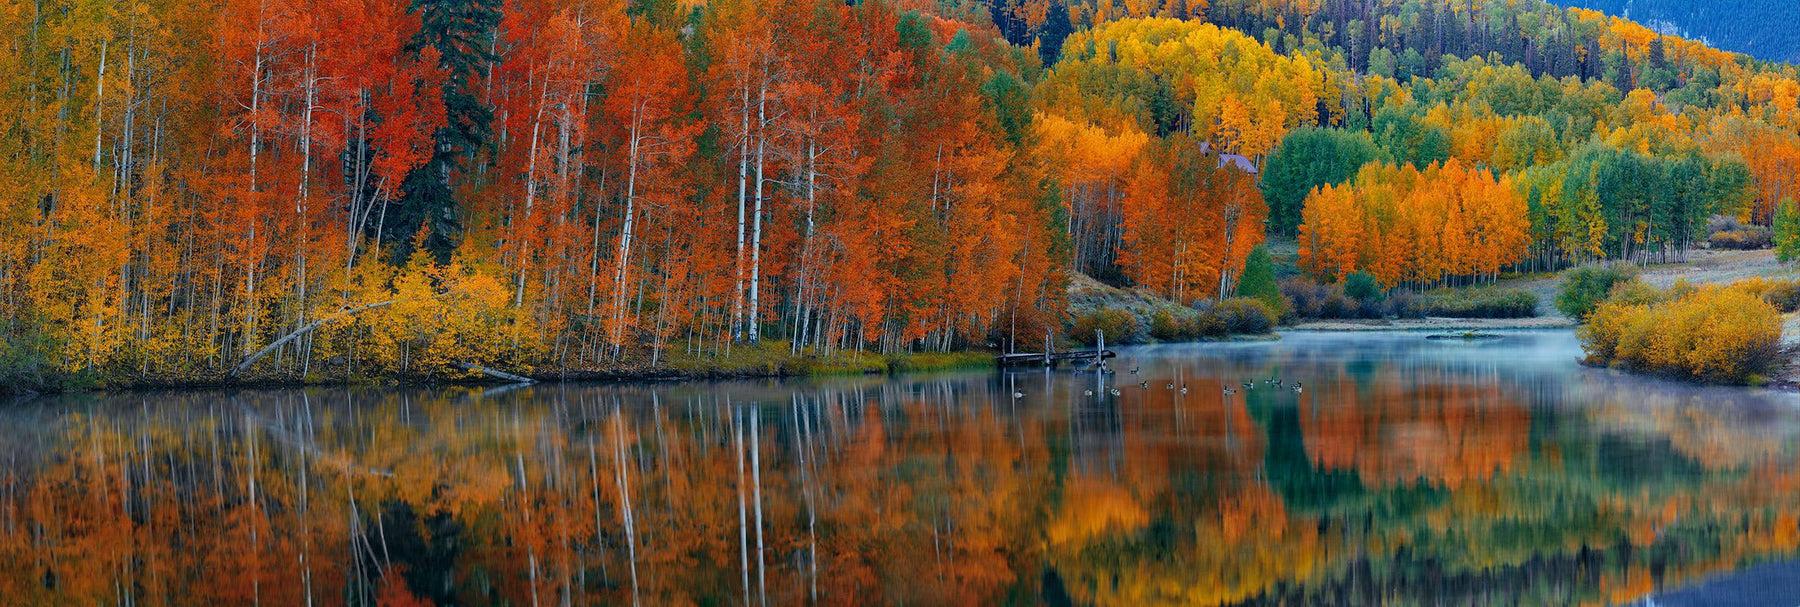 Autumn colored forest reflecting off a misty lake in Telluride Colorado